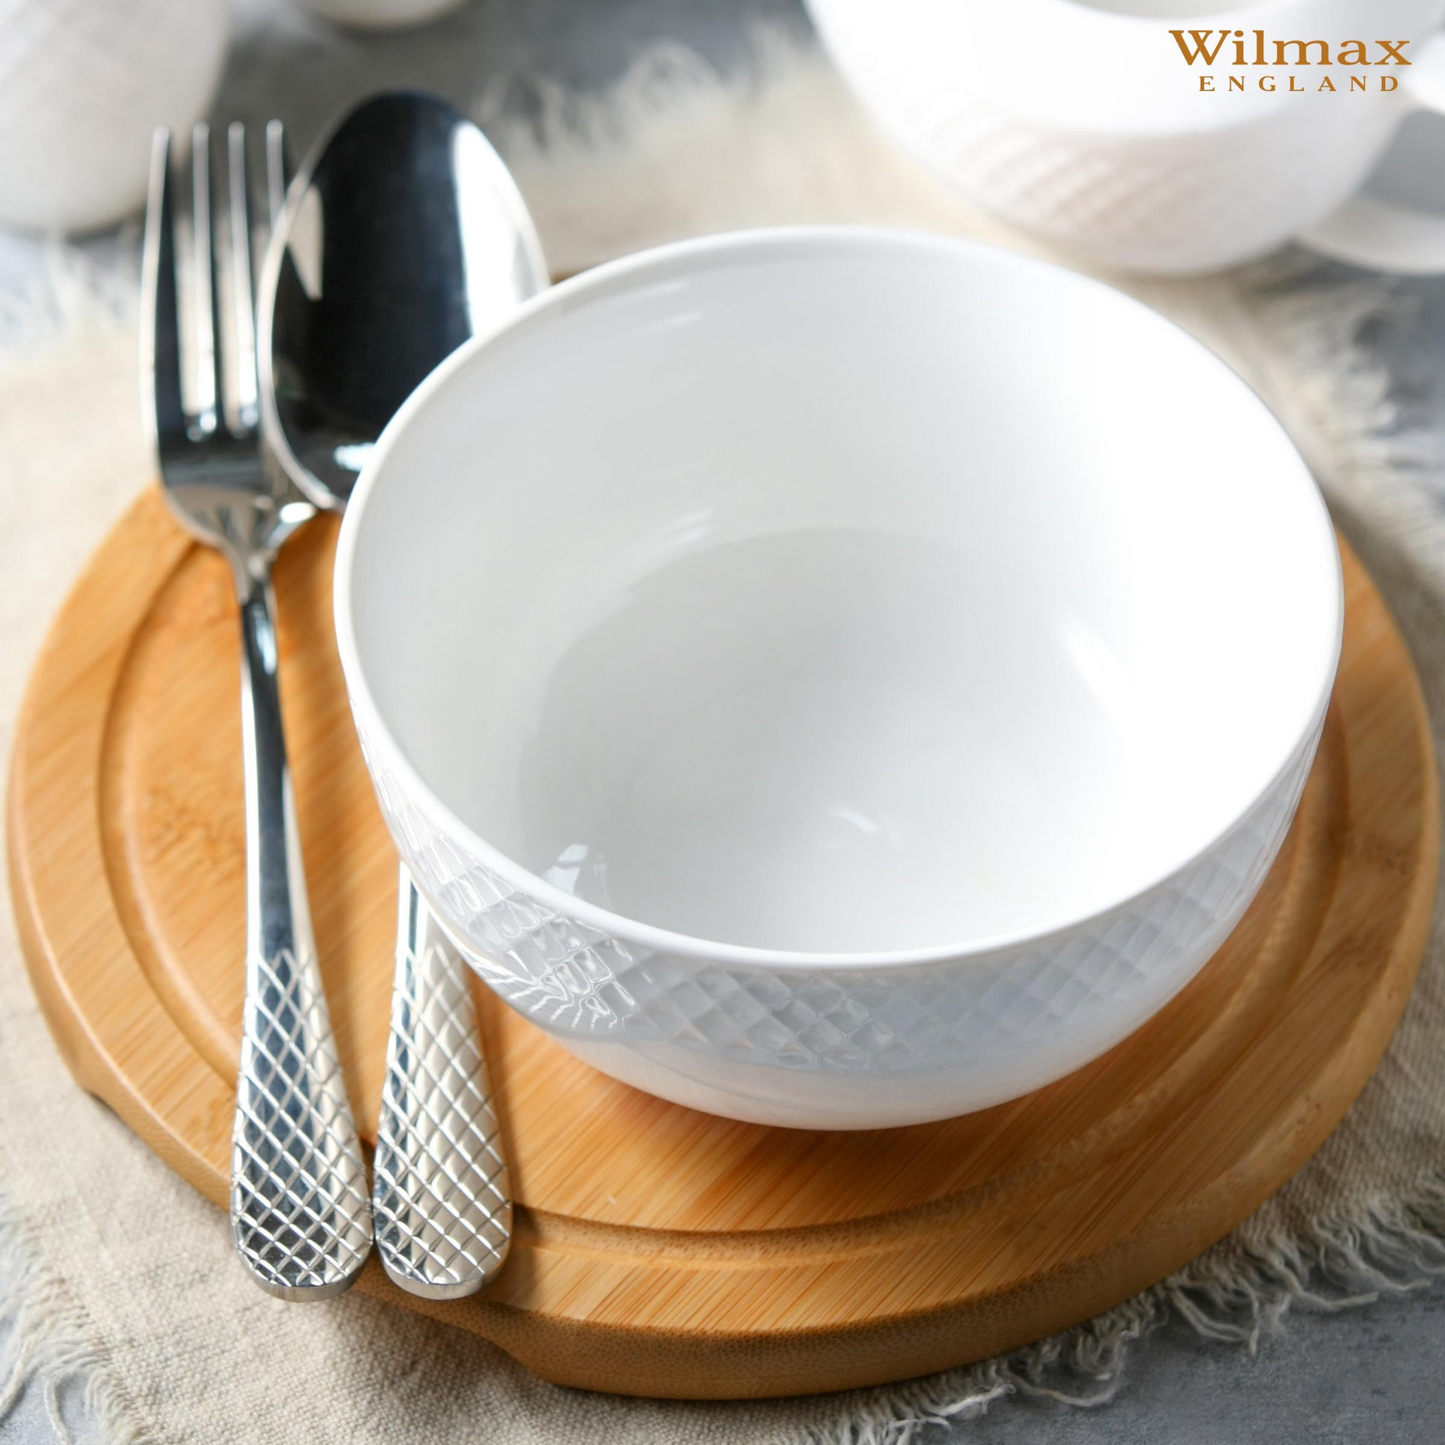 Dinner Spoon 8" inch | 21 Cm In White Box - High-Quality Cutlery for Maximum Comfort, Goodies N Stuff